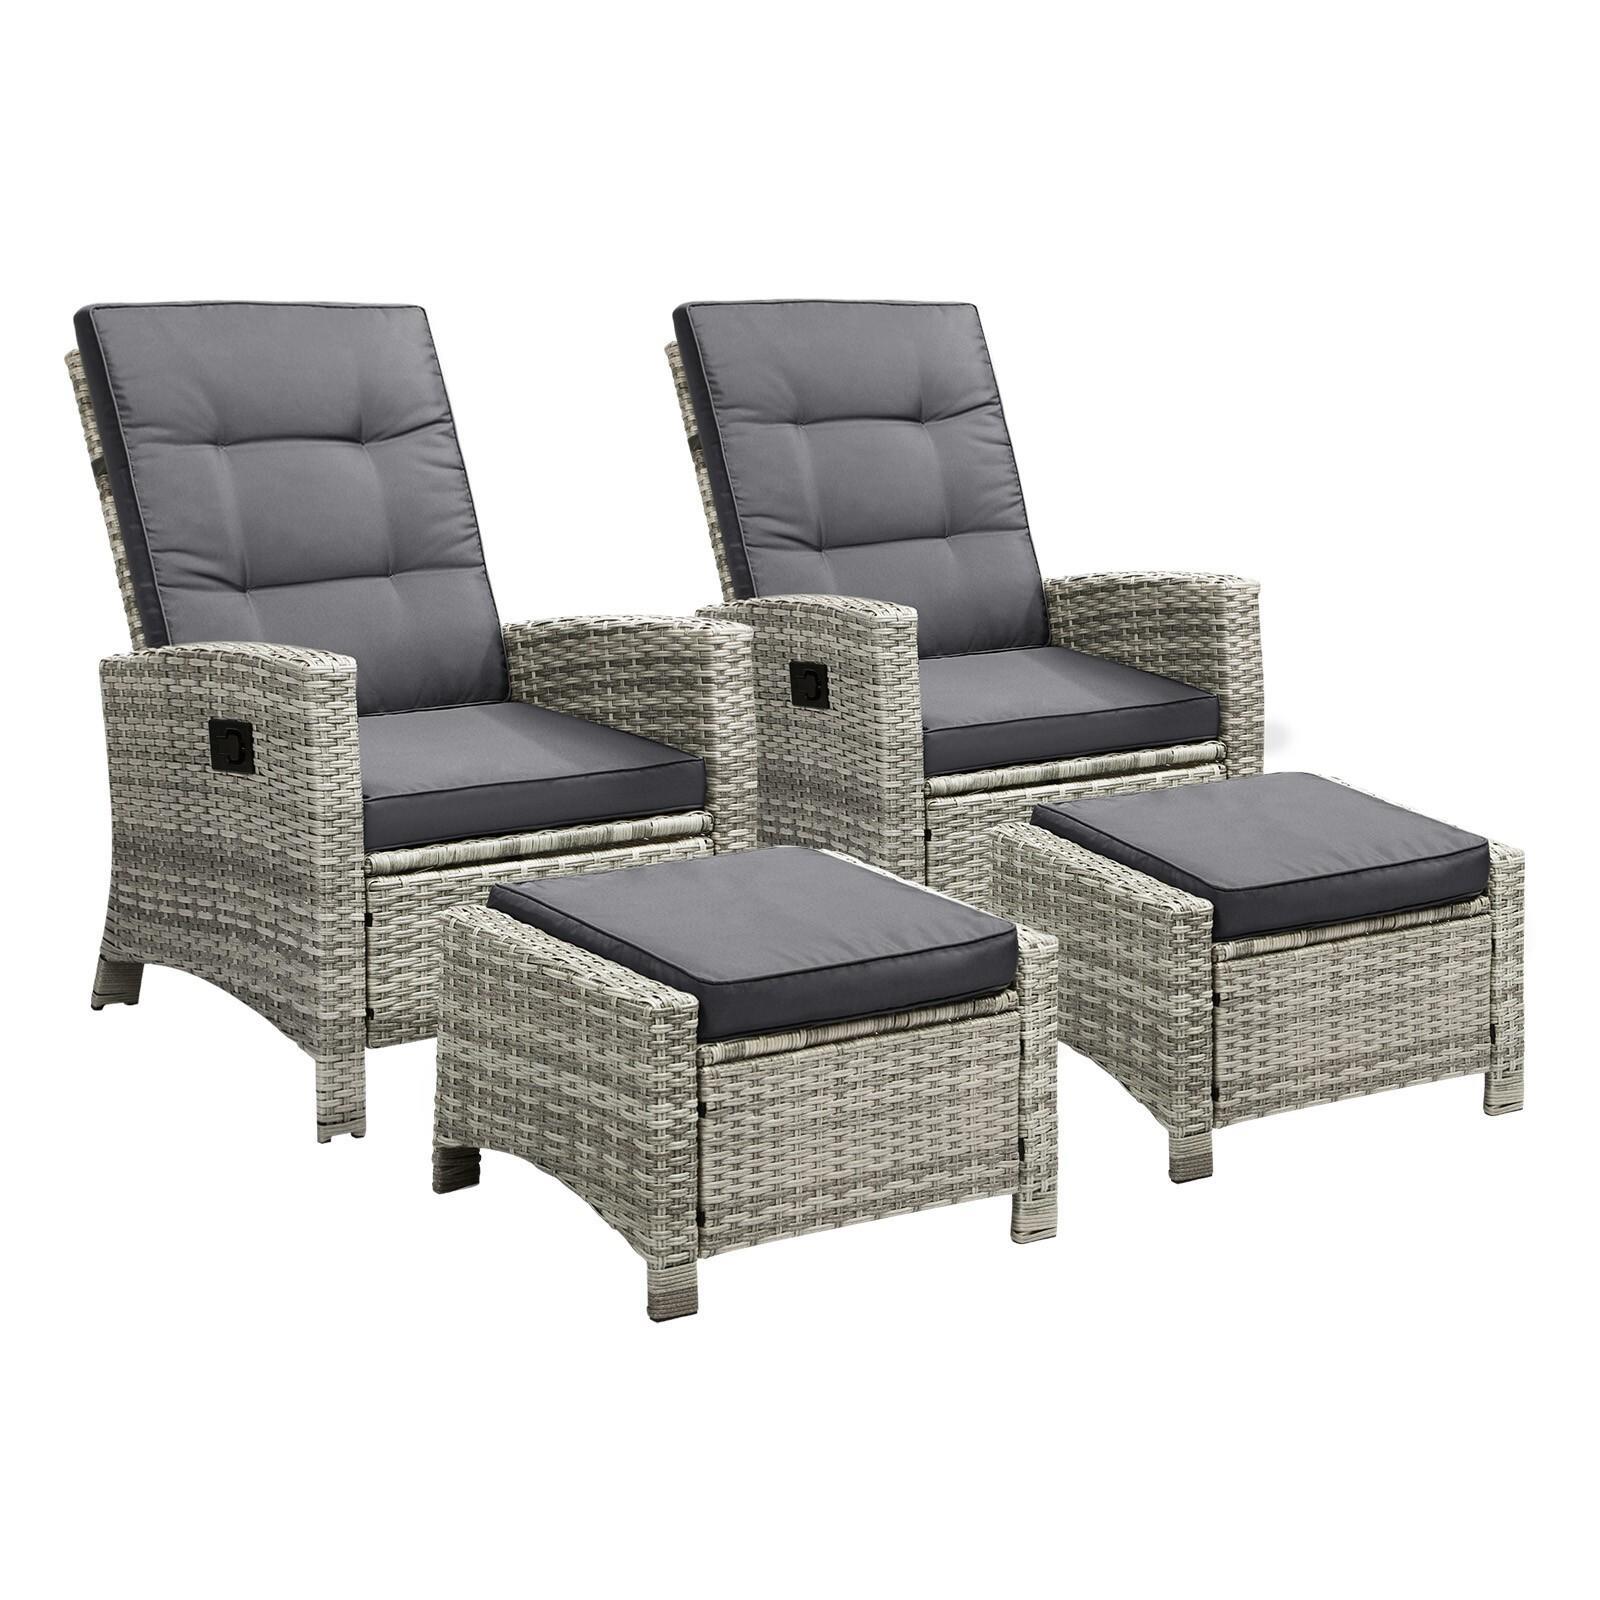 Livsip Recliner Chair Outdoor Chairs 2 Pieces(Grey)